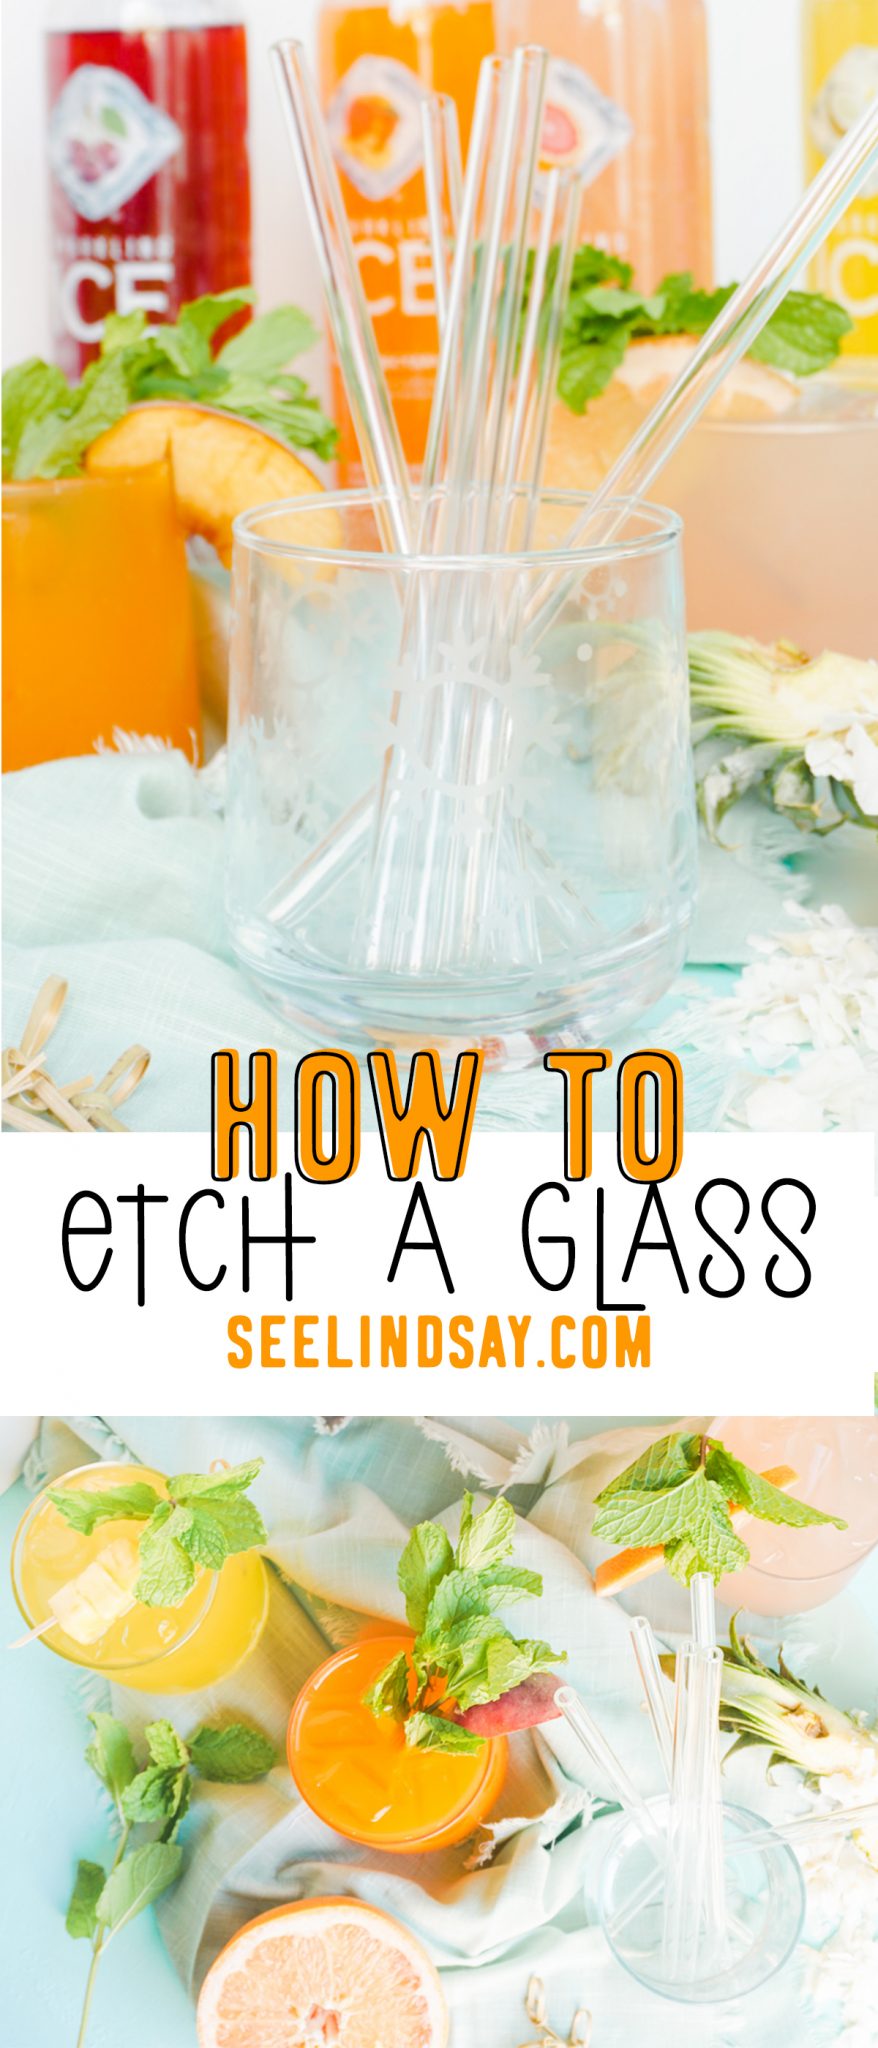 how to etch glass